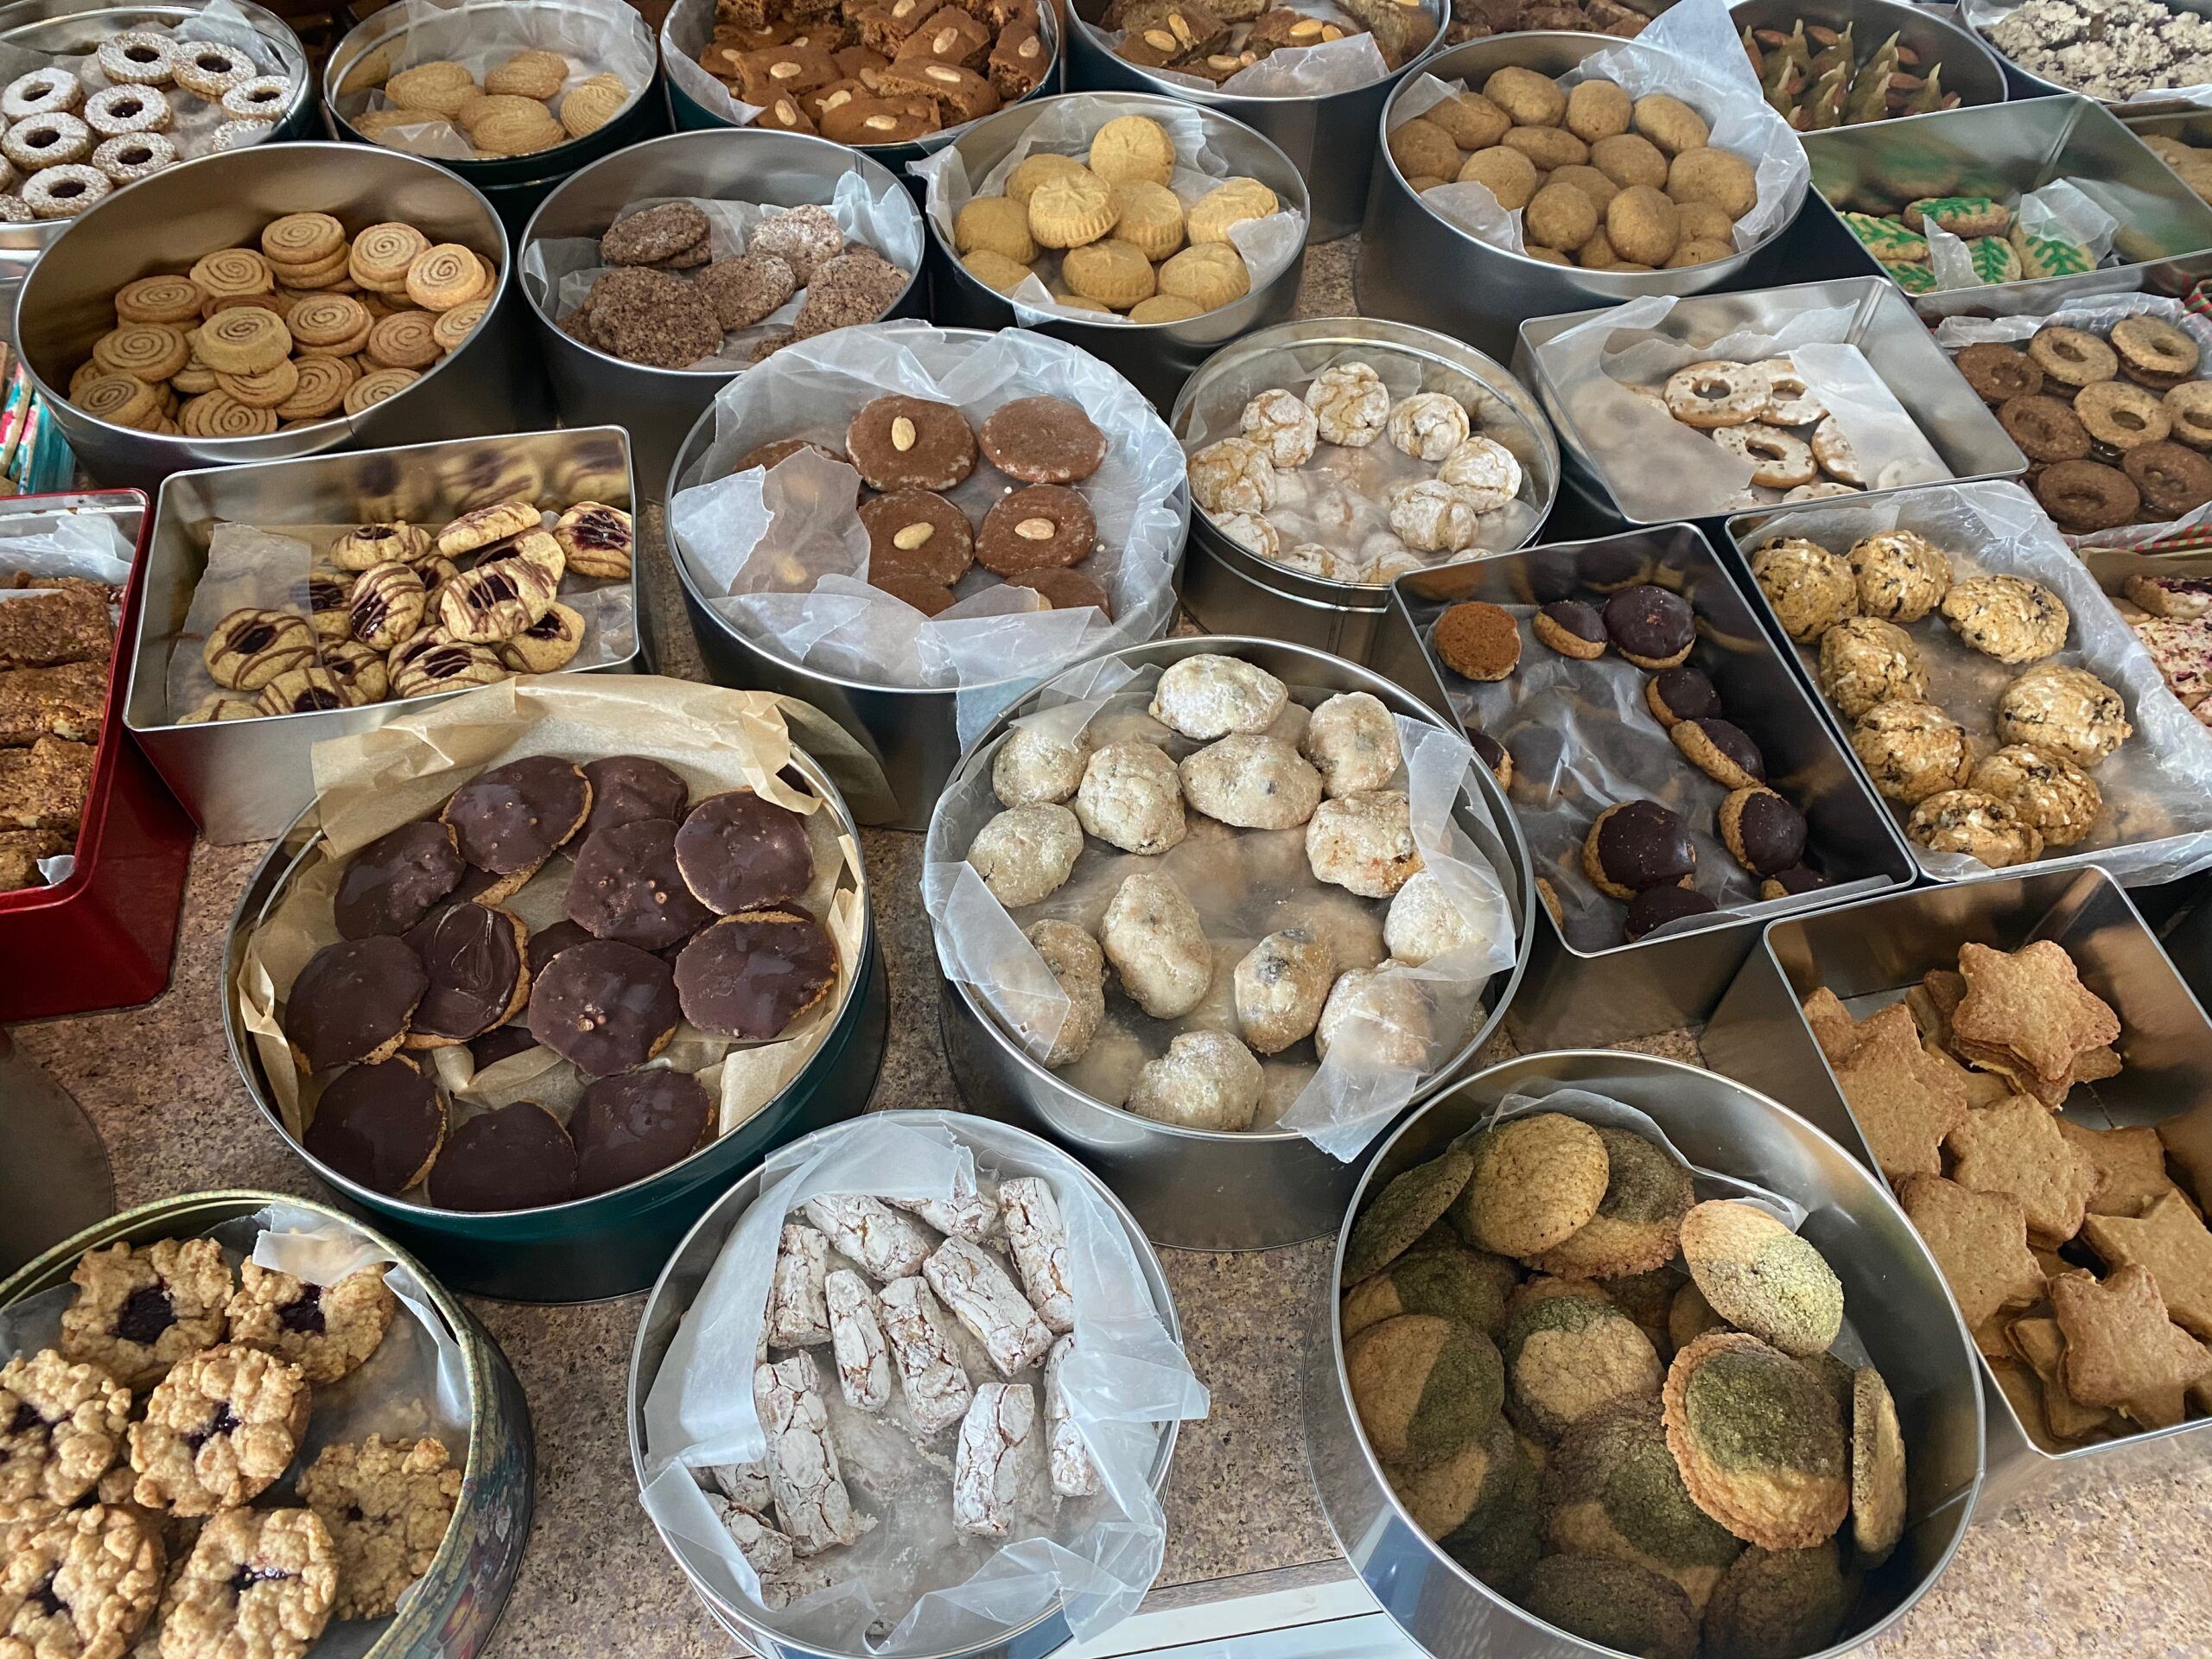 An array of cookies in metal tins on a counter. They cookies are all different shapes and sizes, including jam filled circles, star-shaped cookies, pinwheel cookies, and chocolate cookies. Photo taken by me.